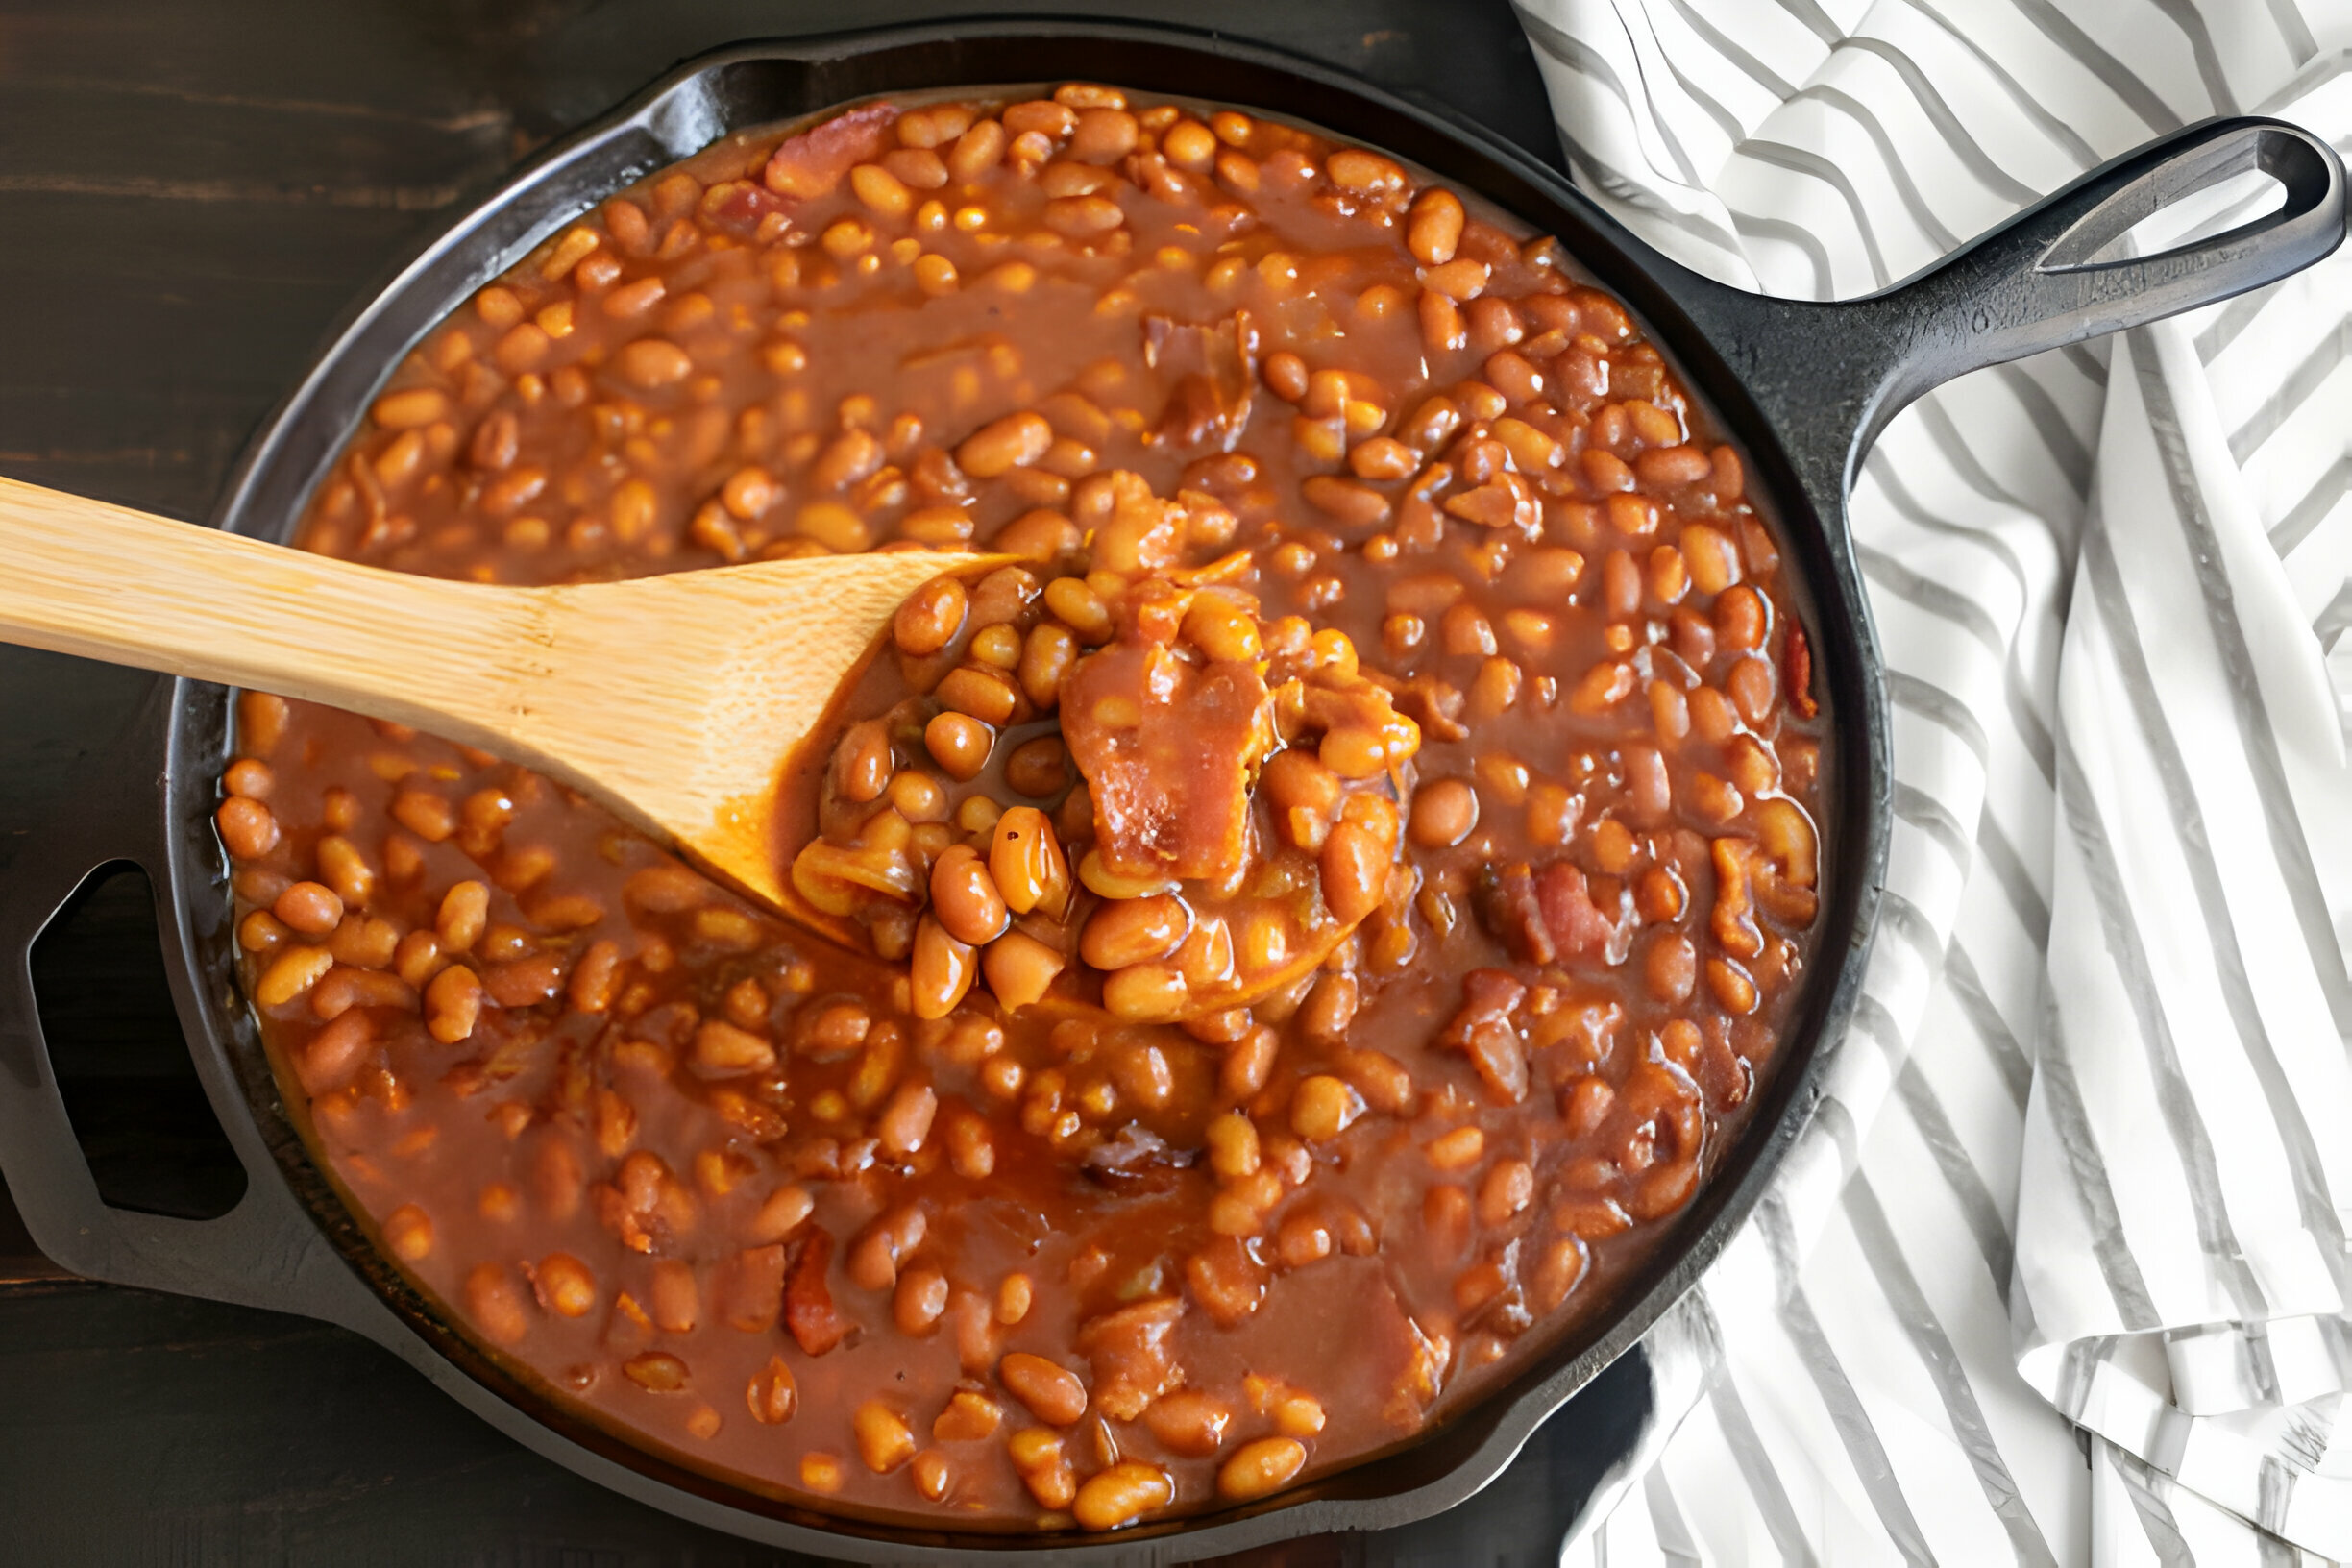 Final baked beans dish ready to serve.